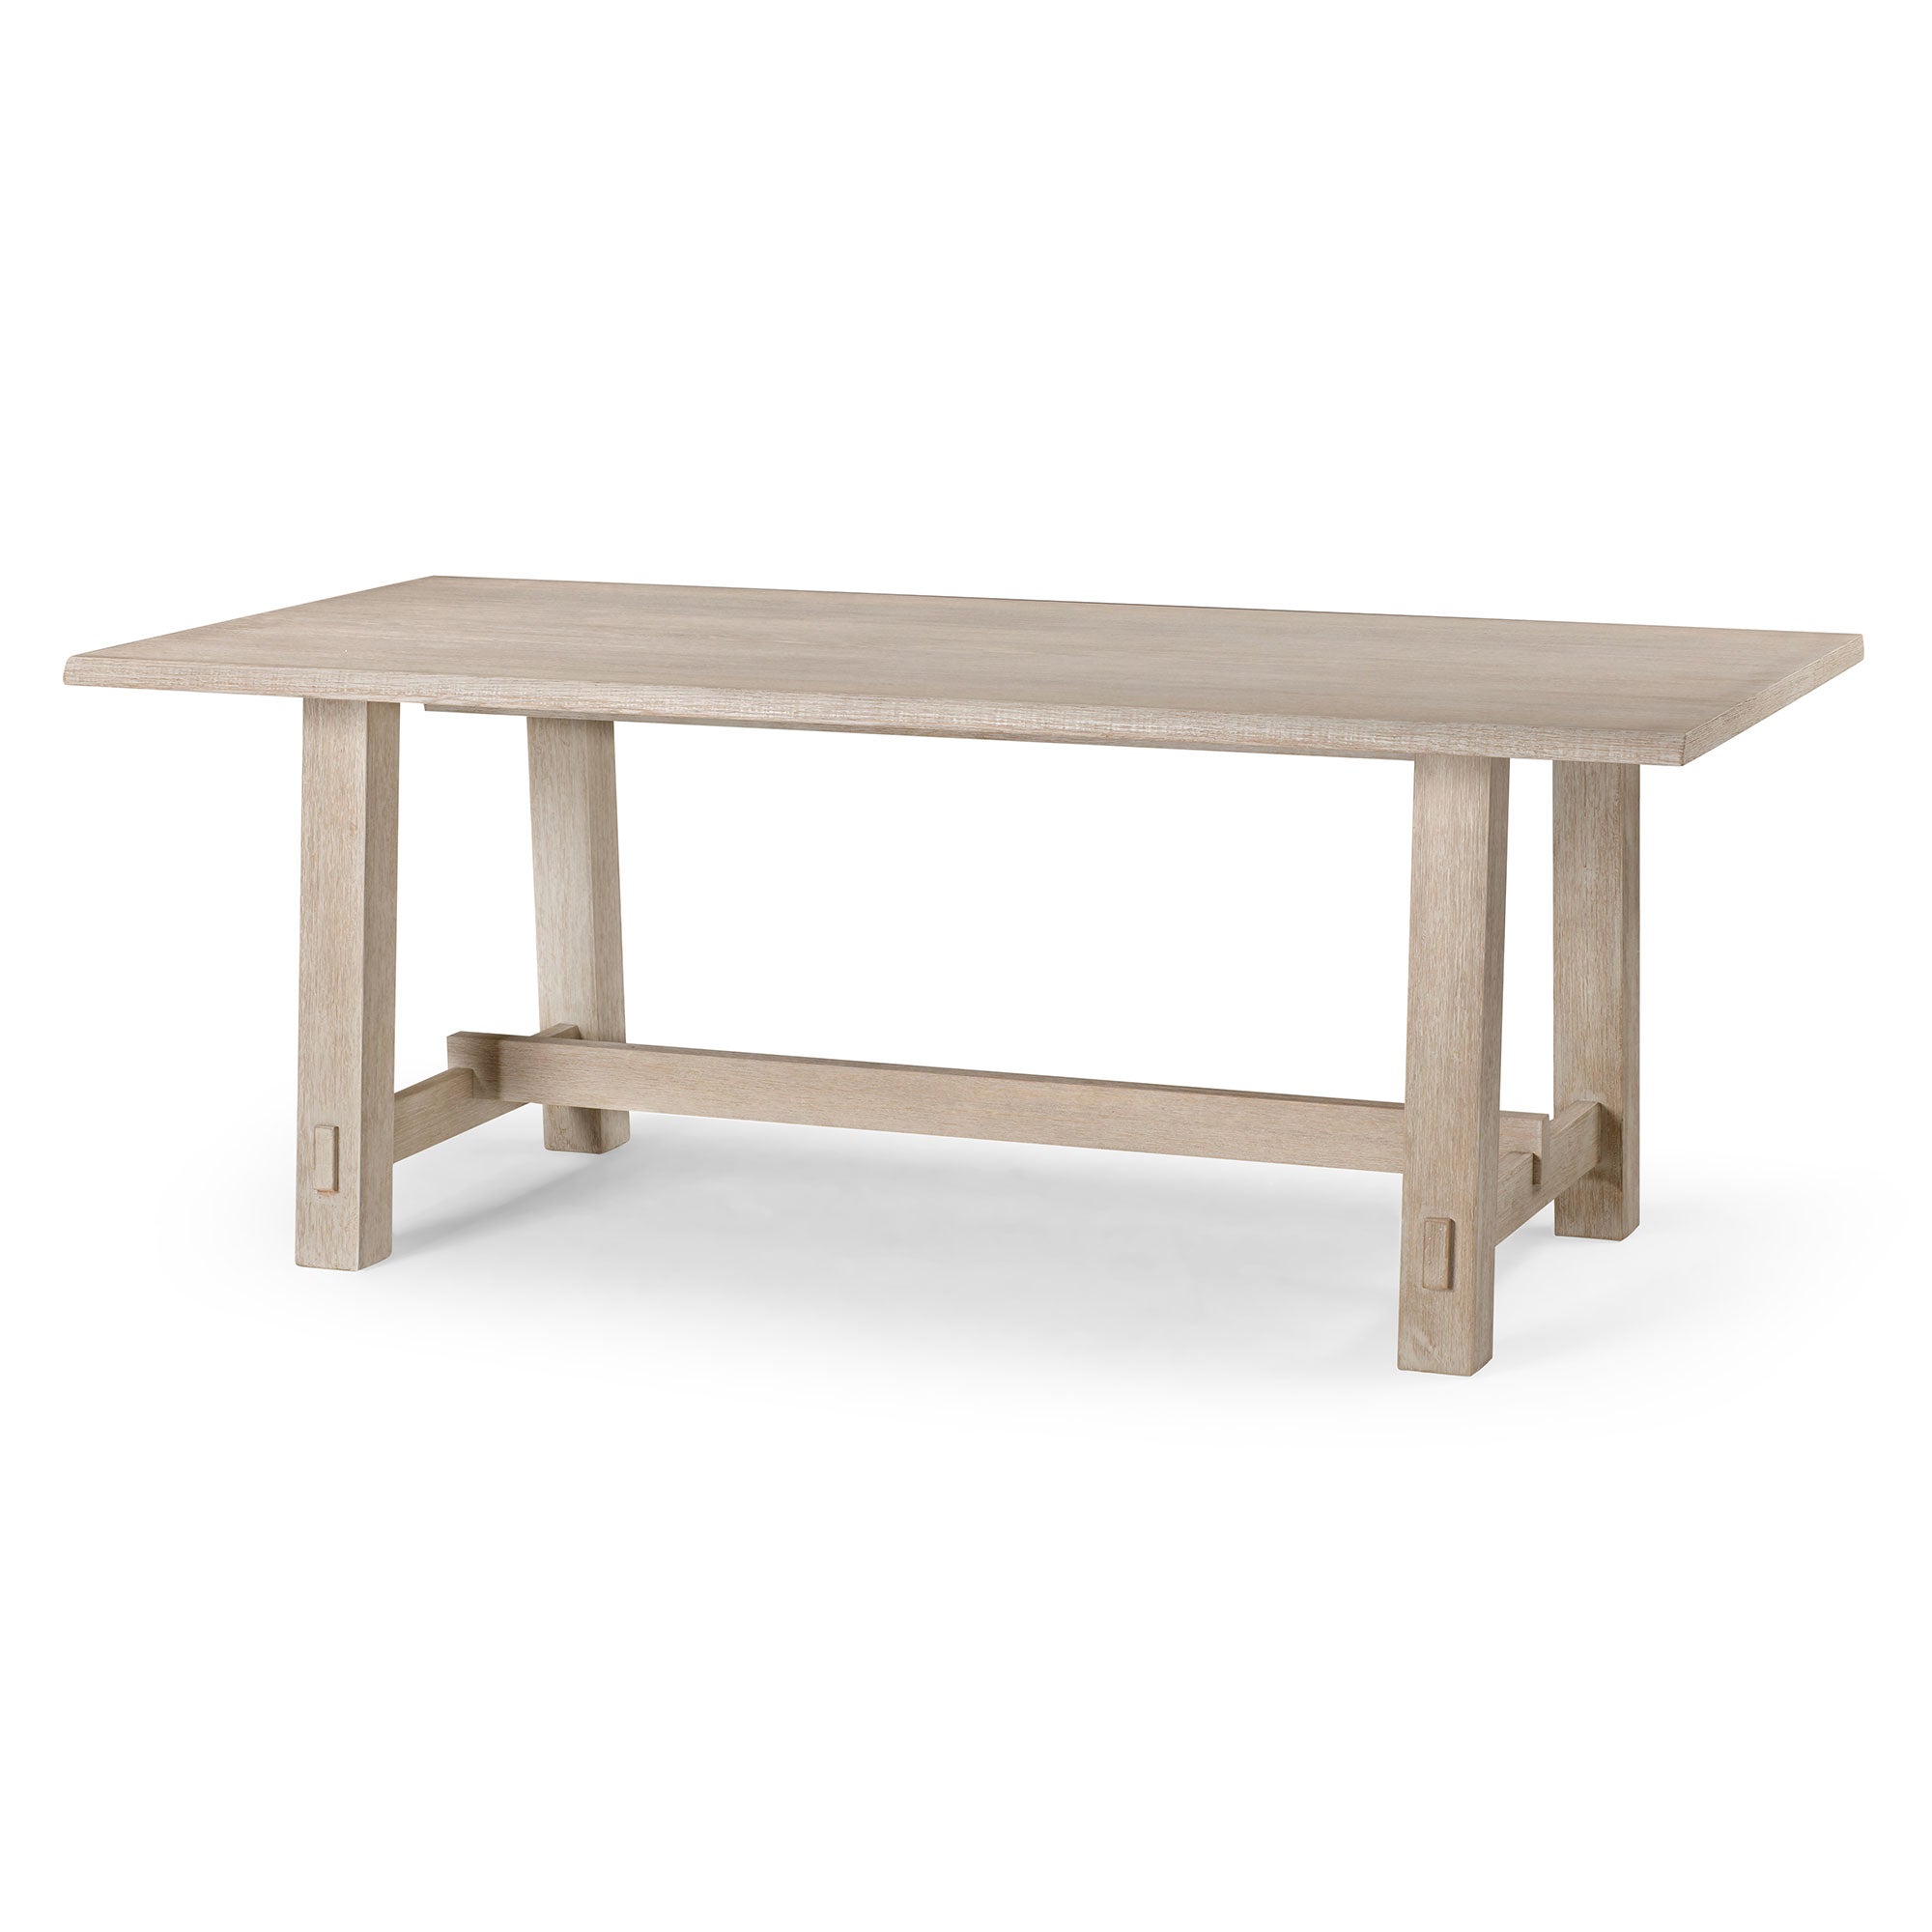 Maven-Lane-Yves-Rectangular-Wooden-Dining-Table-in-Weathered-White-Finish-Kitchen-&-Dining-Room-Tables